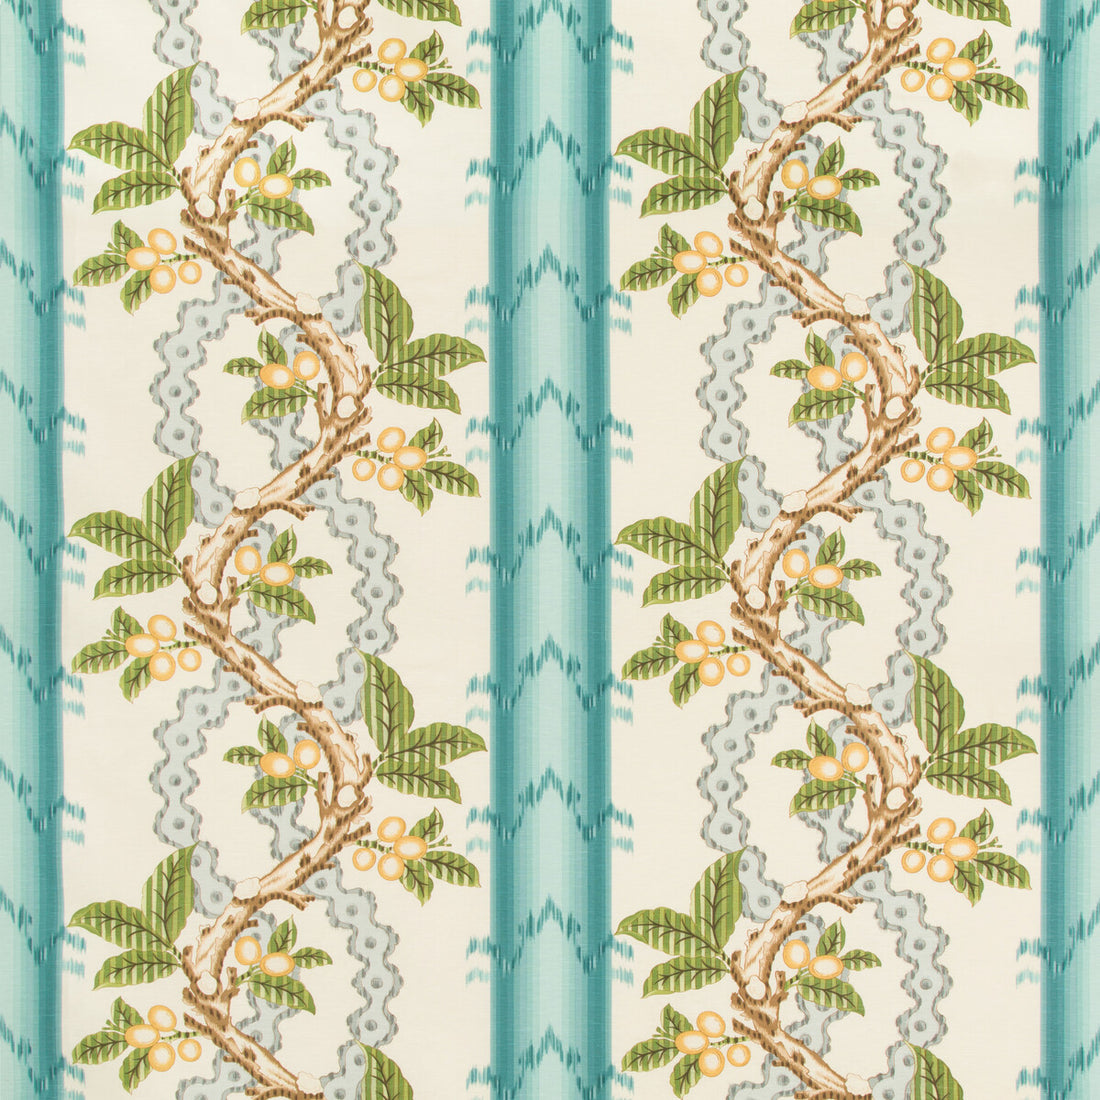 Josselin Cotton And Linen Print fabric in aqua/mist color - pattern BR-79510.13.0 - by Brunschwig &amp; Fils in the Cevennes collection